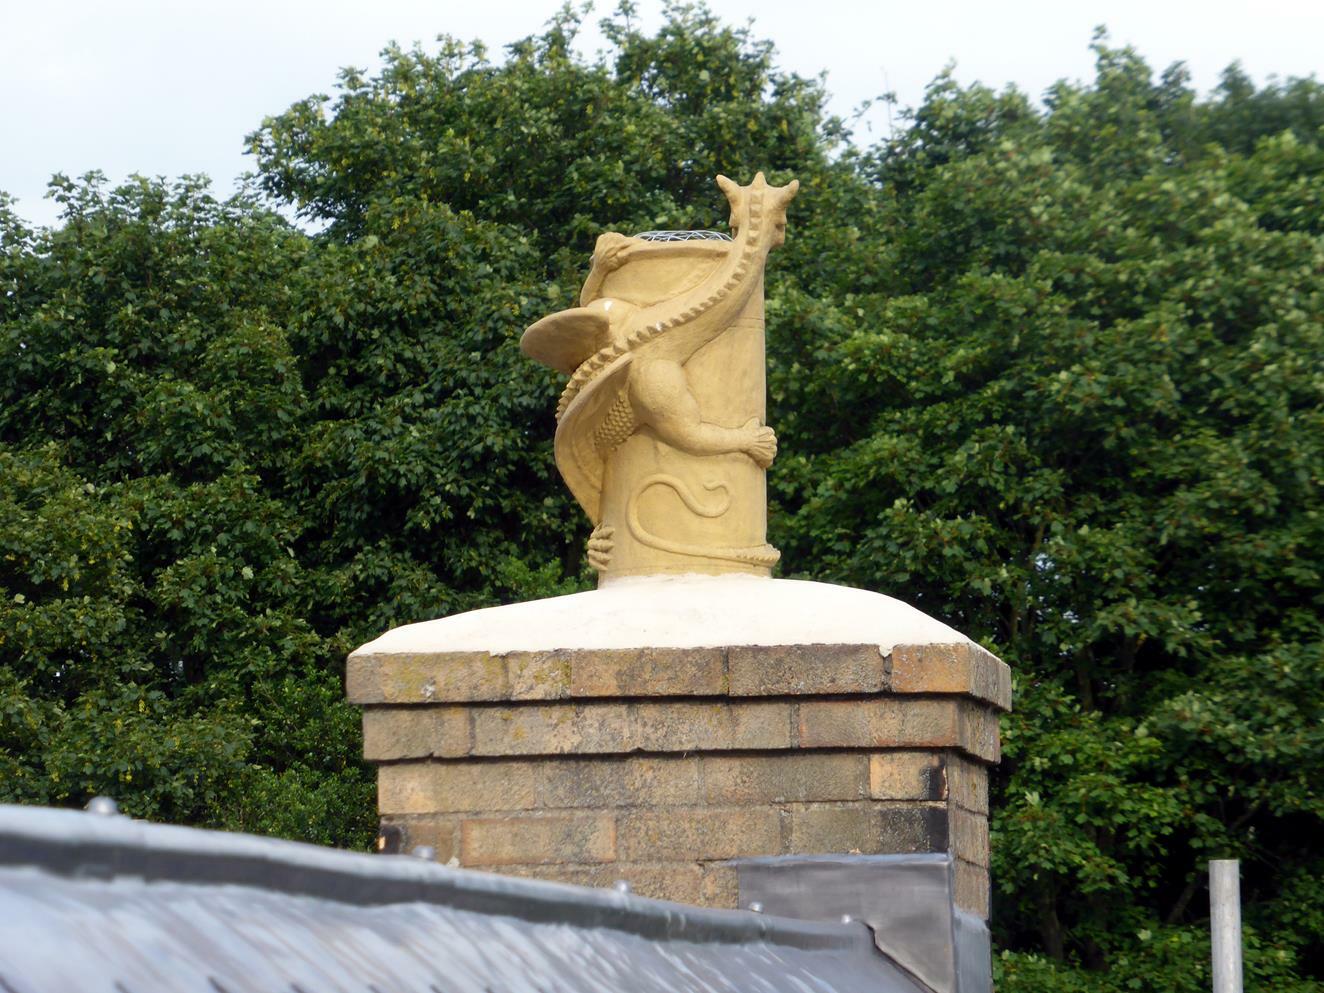 Installation of a yellow buff dragon chimney pot in Holtby, York